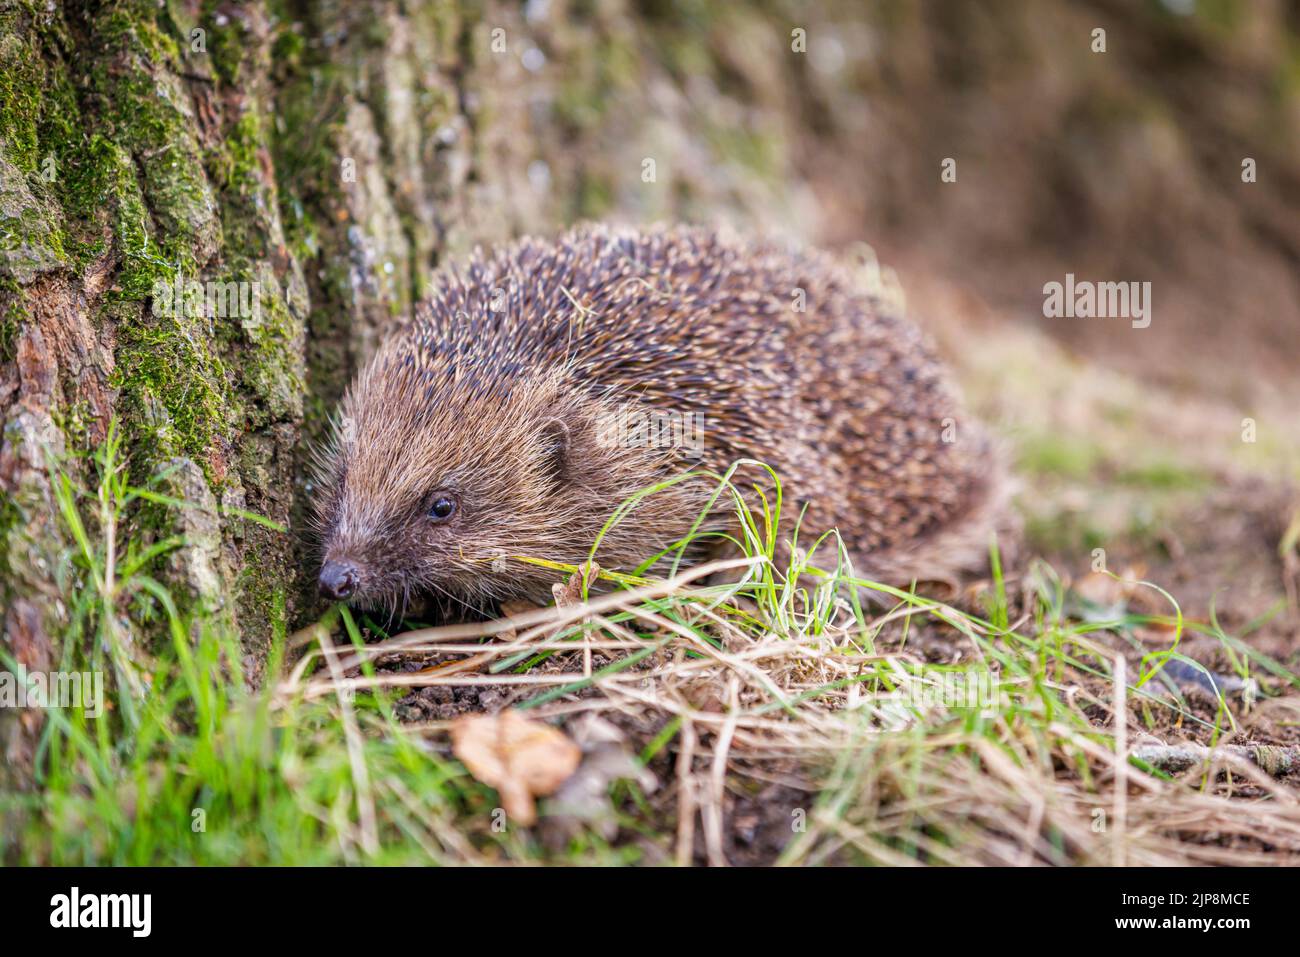 Common or European hedgehog (Erinaceus europaeus), a spiny mammal, seen close-up at the foot of a tree in Surrey, south-east England Stock Photo